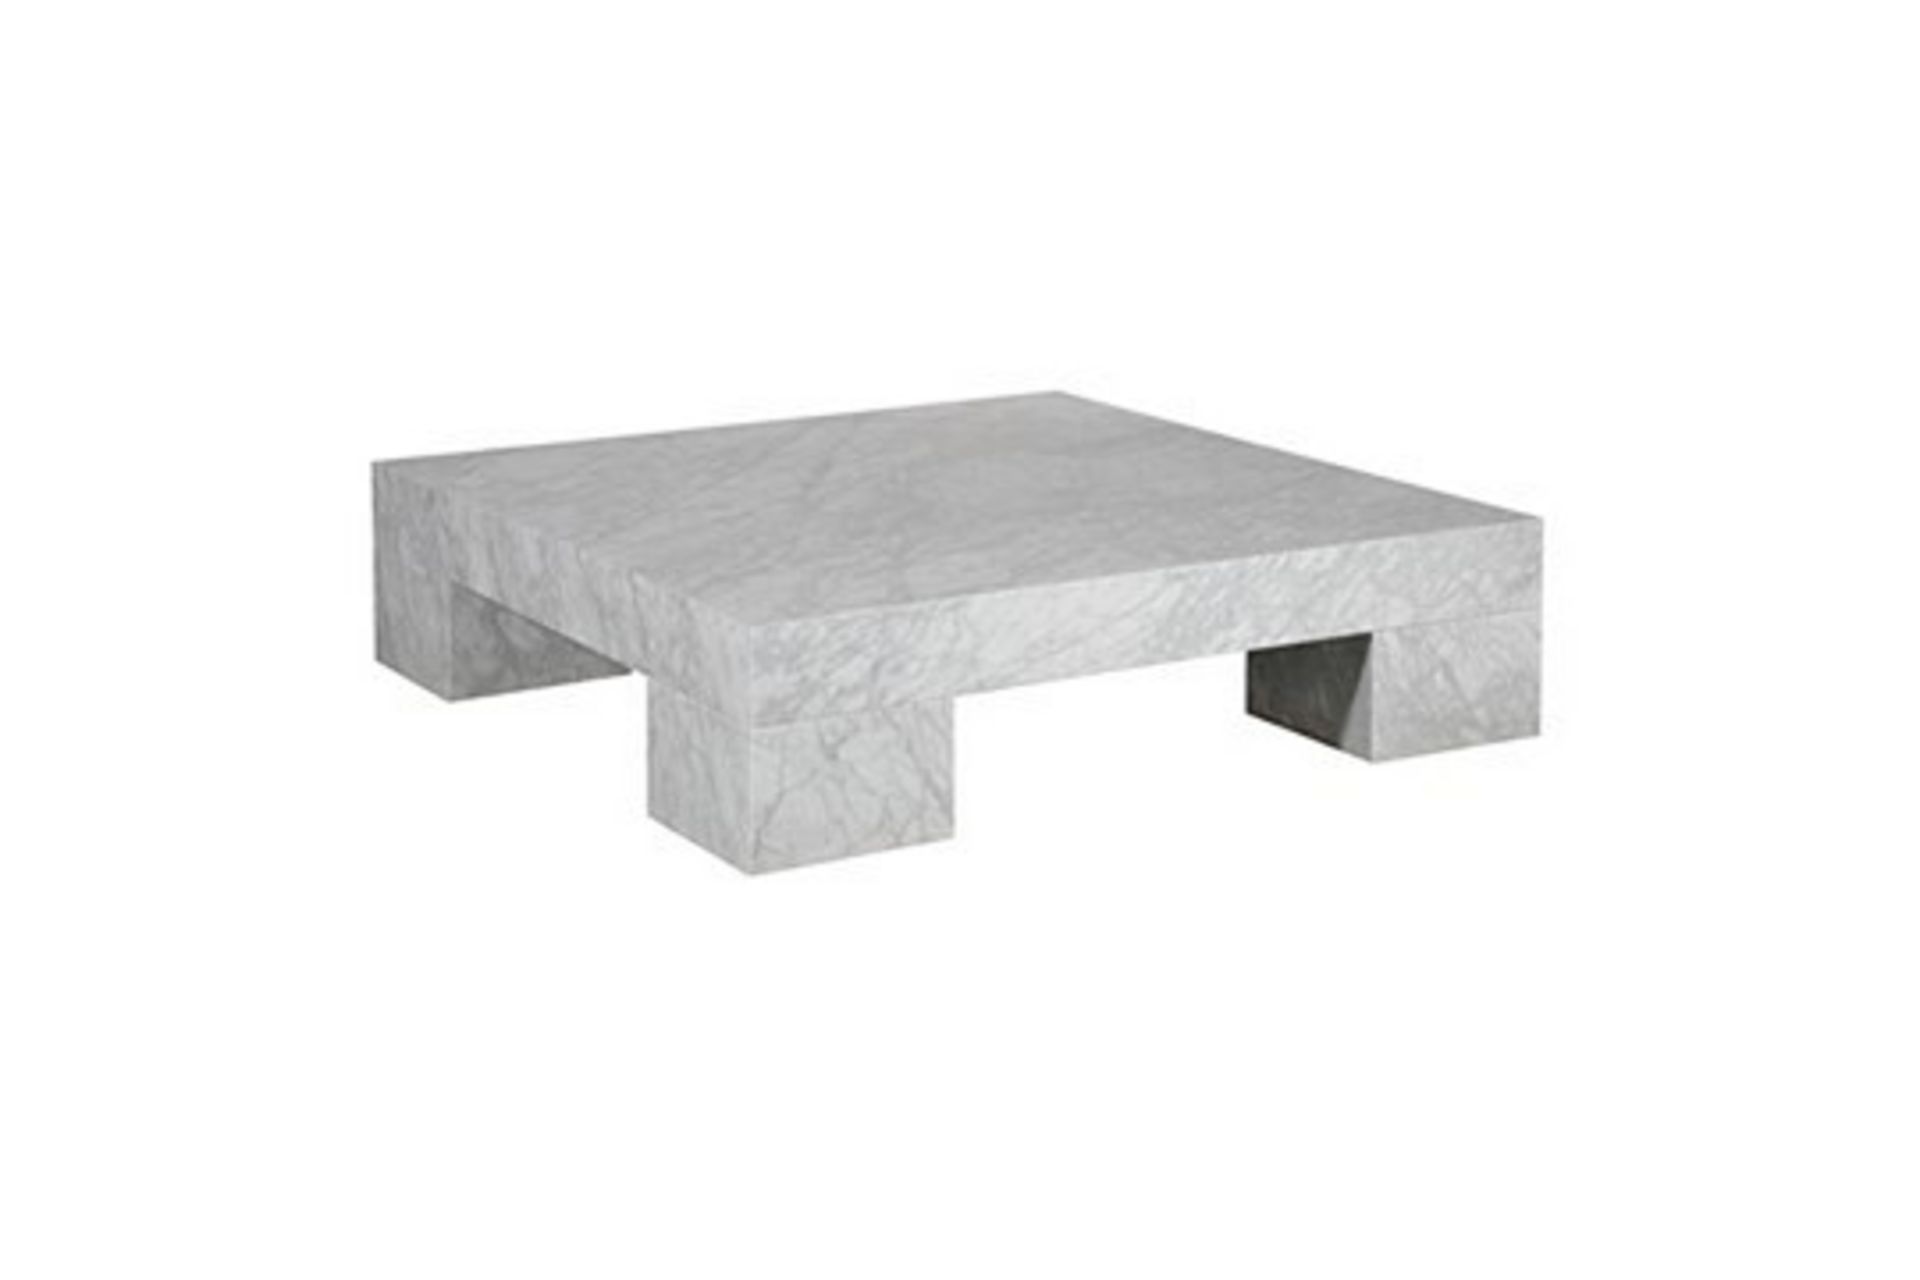 Coffee Table - Marble Modern Big Foot CoffeeTable Polished White Marble 203 x 127 x 38cm RRP £1035 (